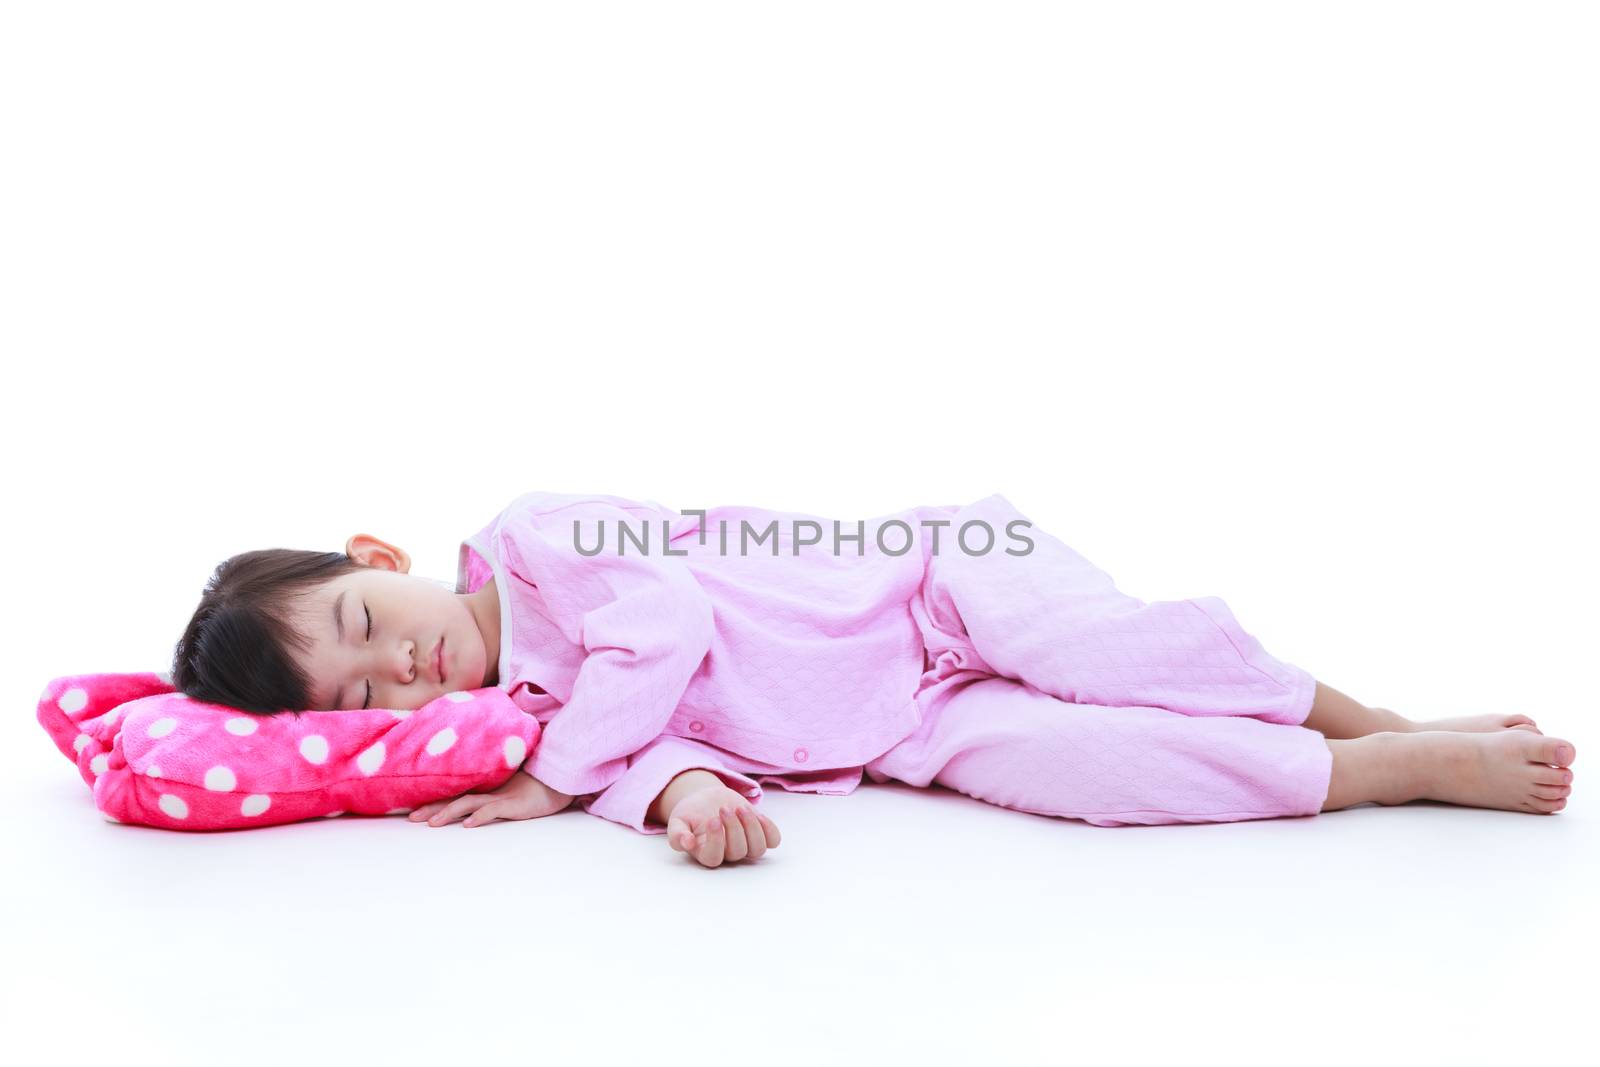 Full body. Healthy children concept. Little asian child sleeping peacefully. Adorable girl in pink pajamas taking a nap. Isolated on white background.